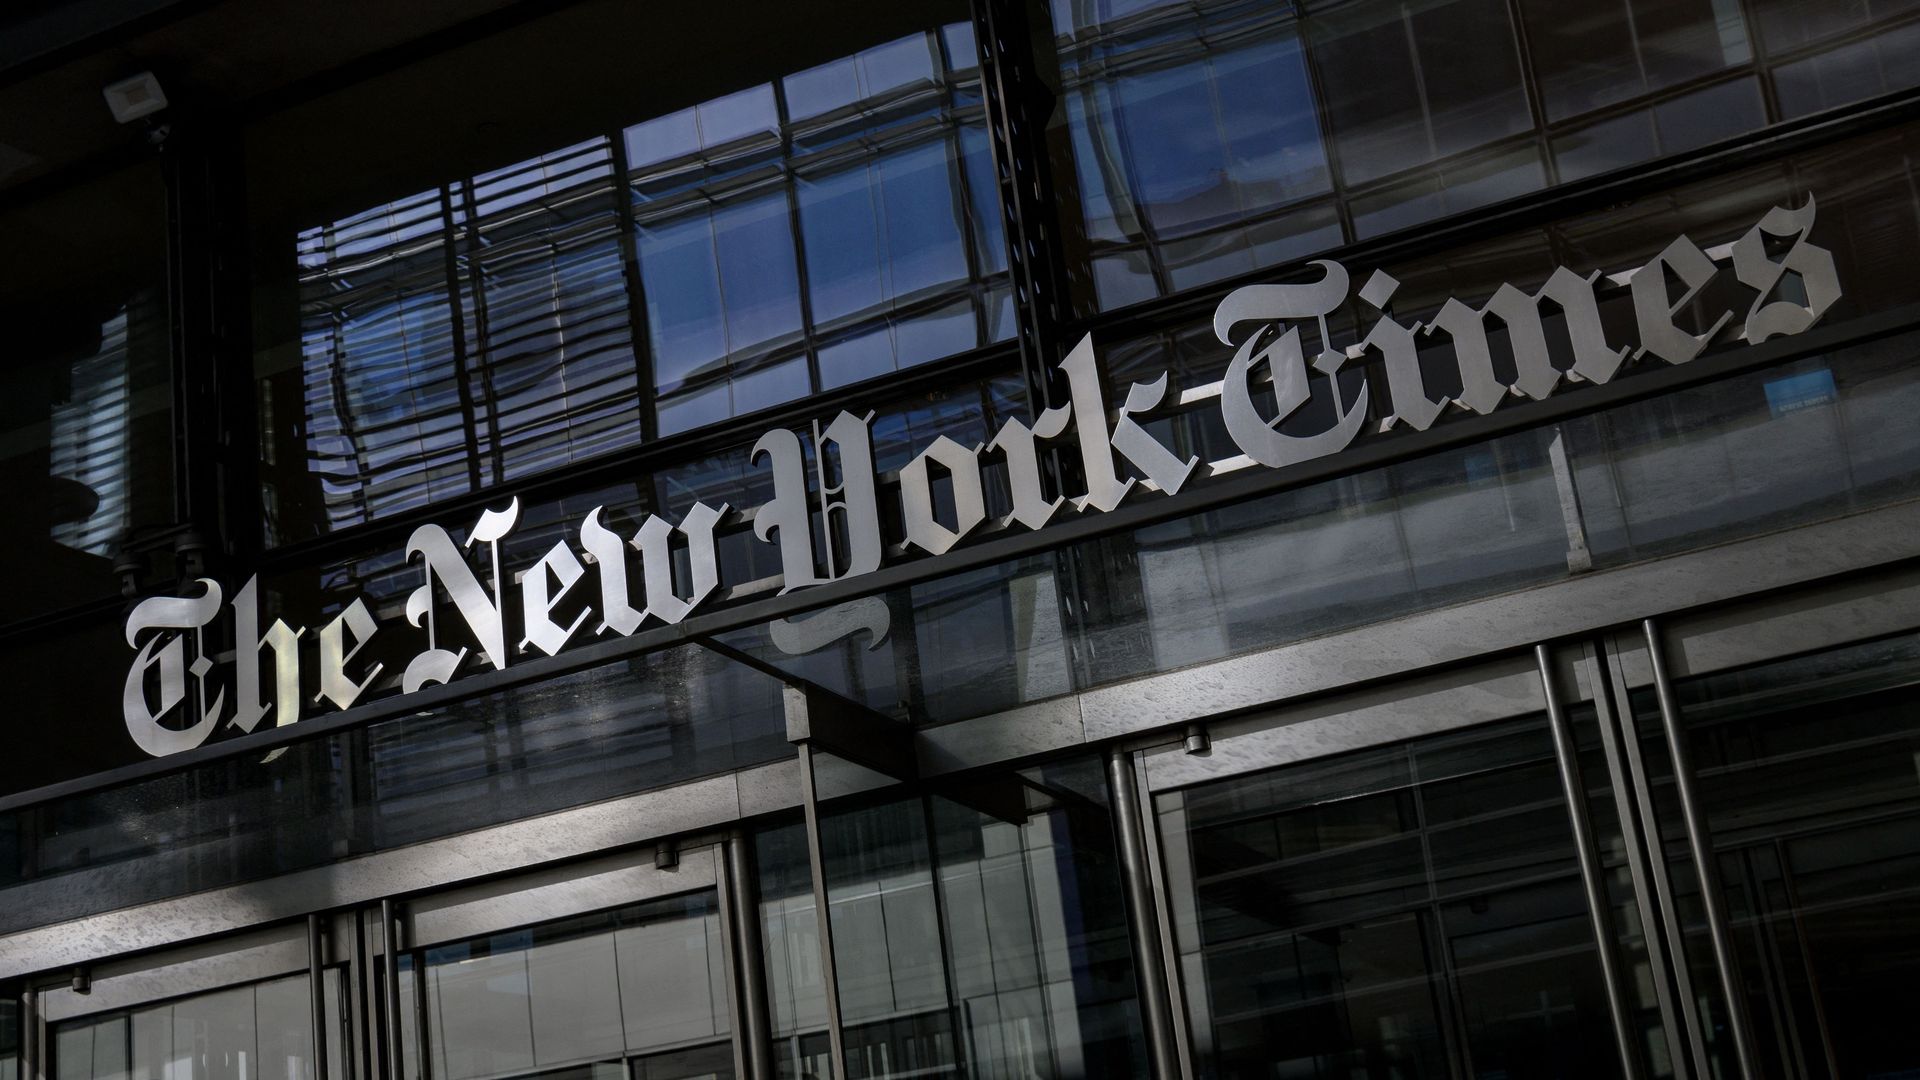 The New York Times Building in New York City on February 1, 2022. - The New York Times announced on January 31, 2022, i